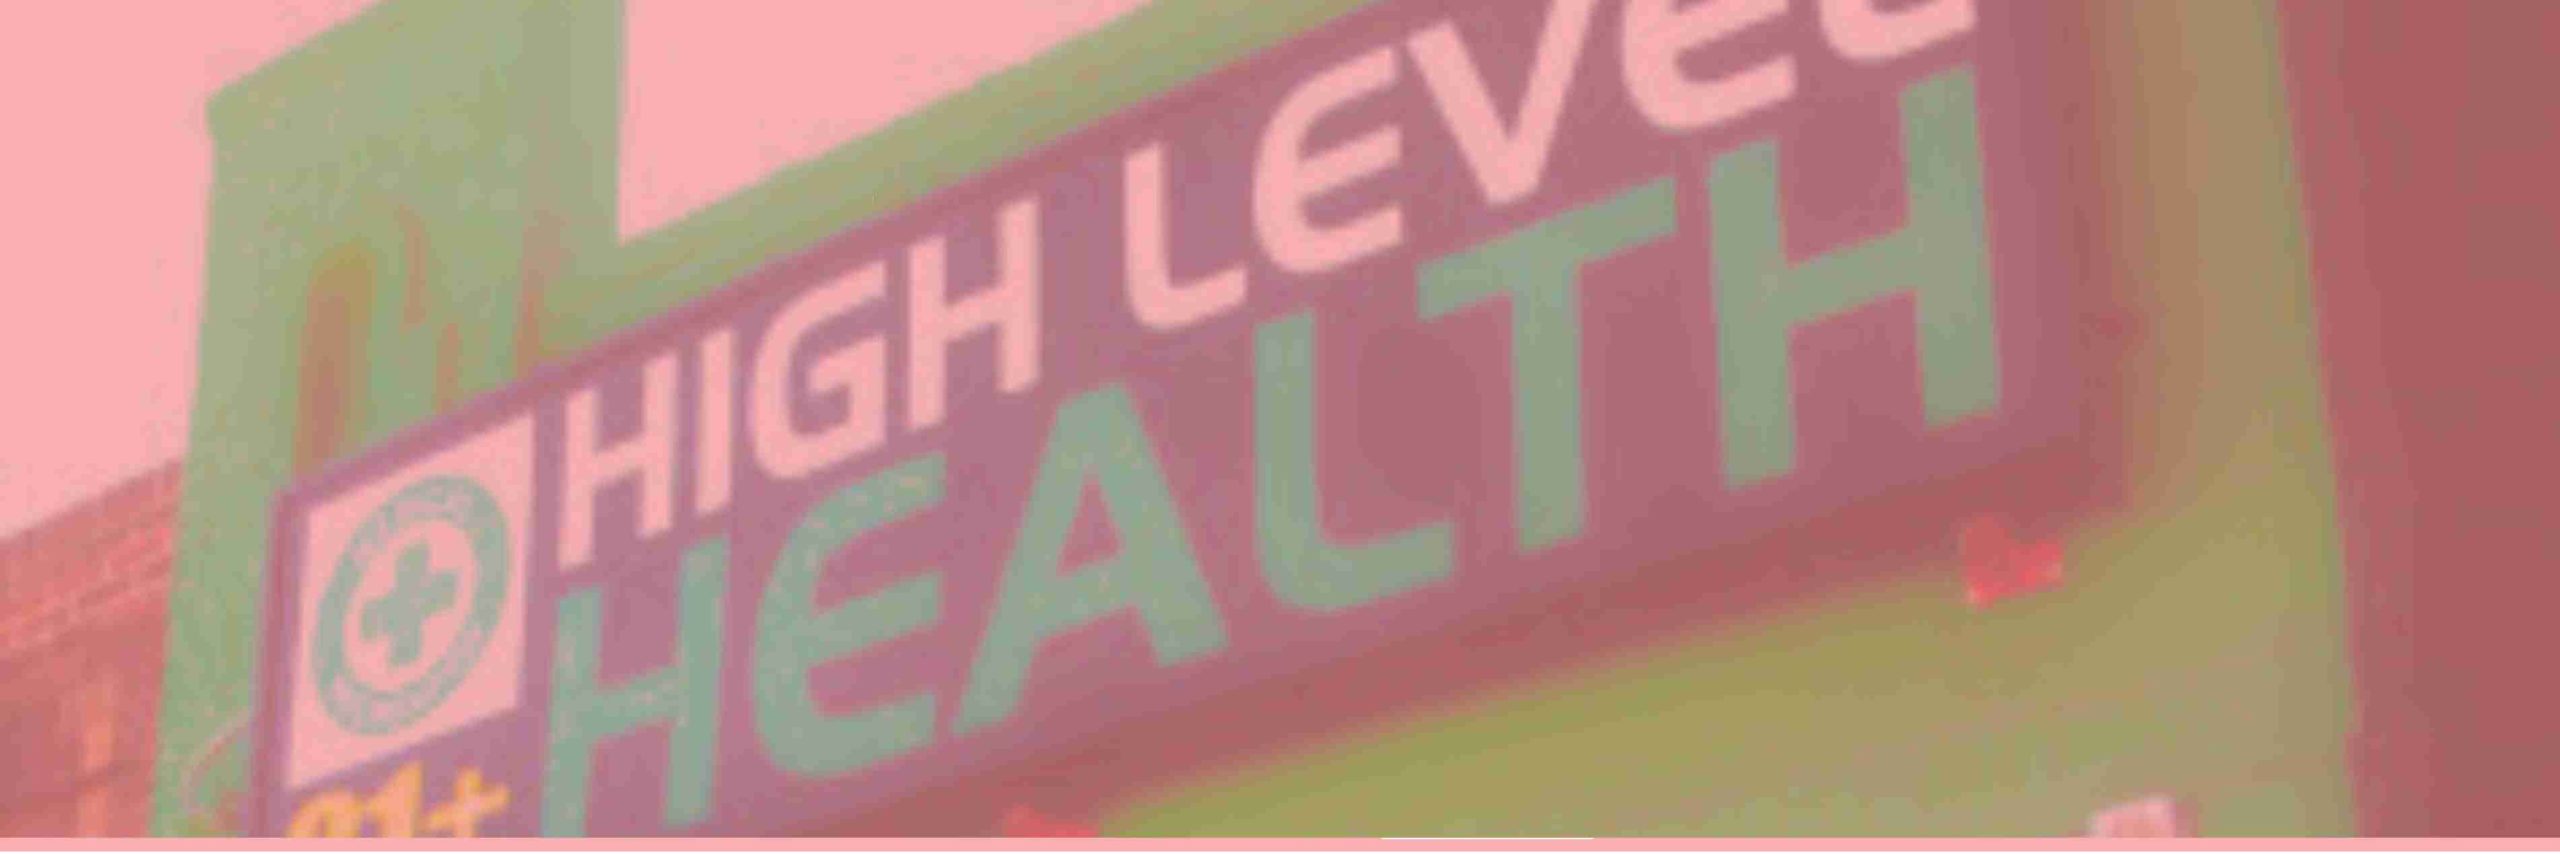 Photo of High Level Health's storefront sign with a pink overlay.